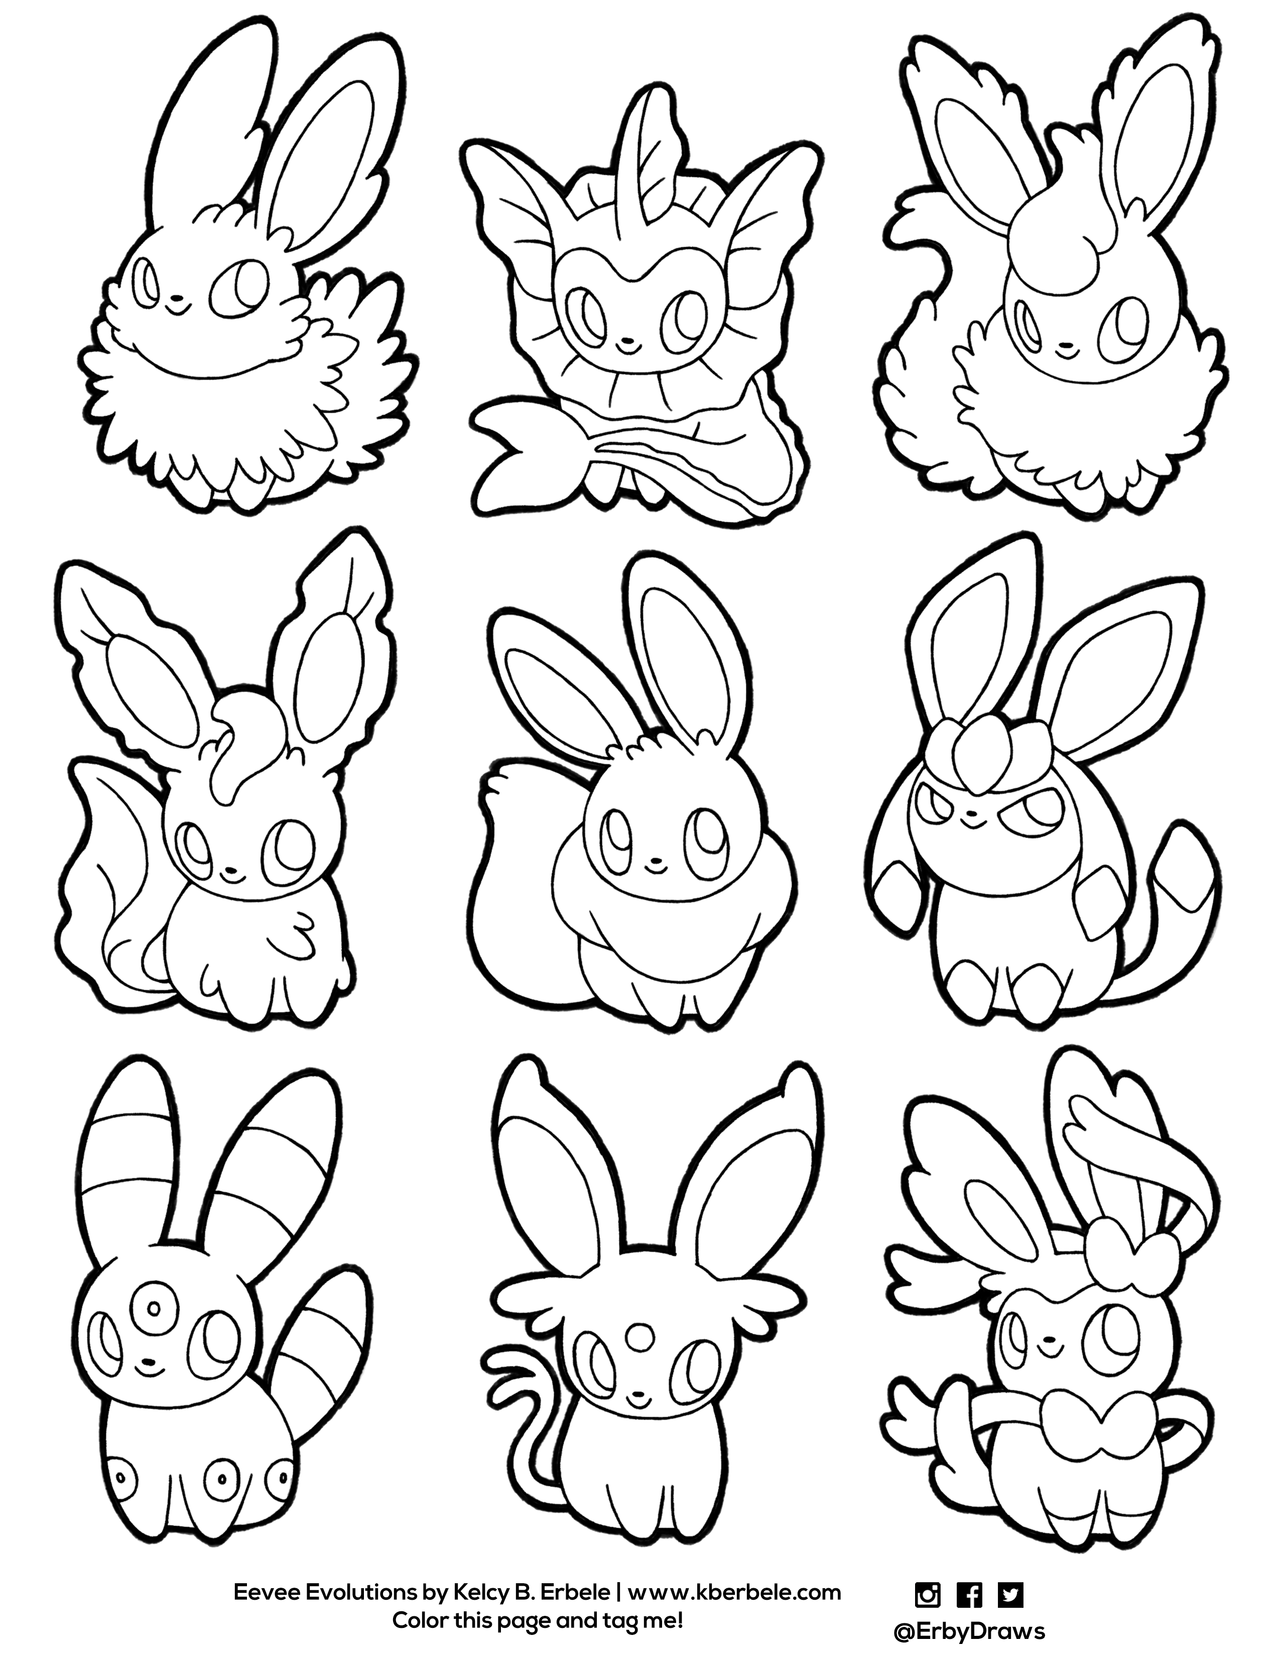 Â eeveelution coloring page the file is on my